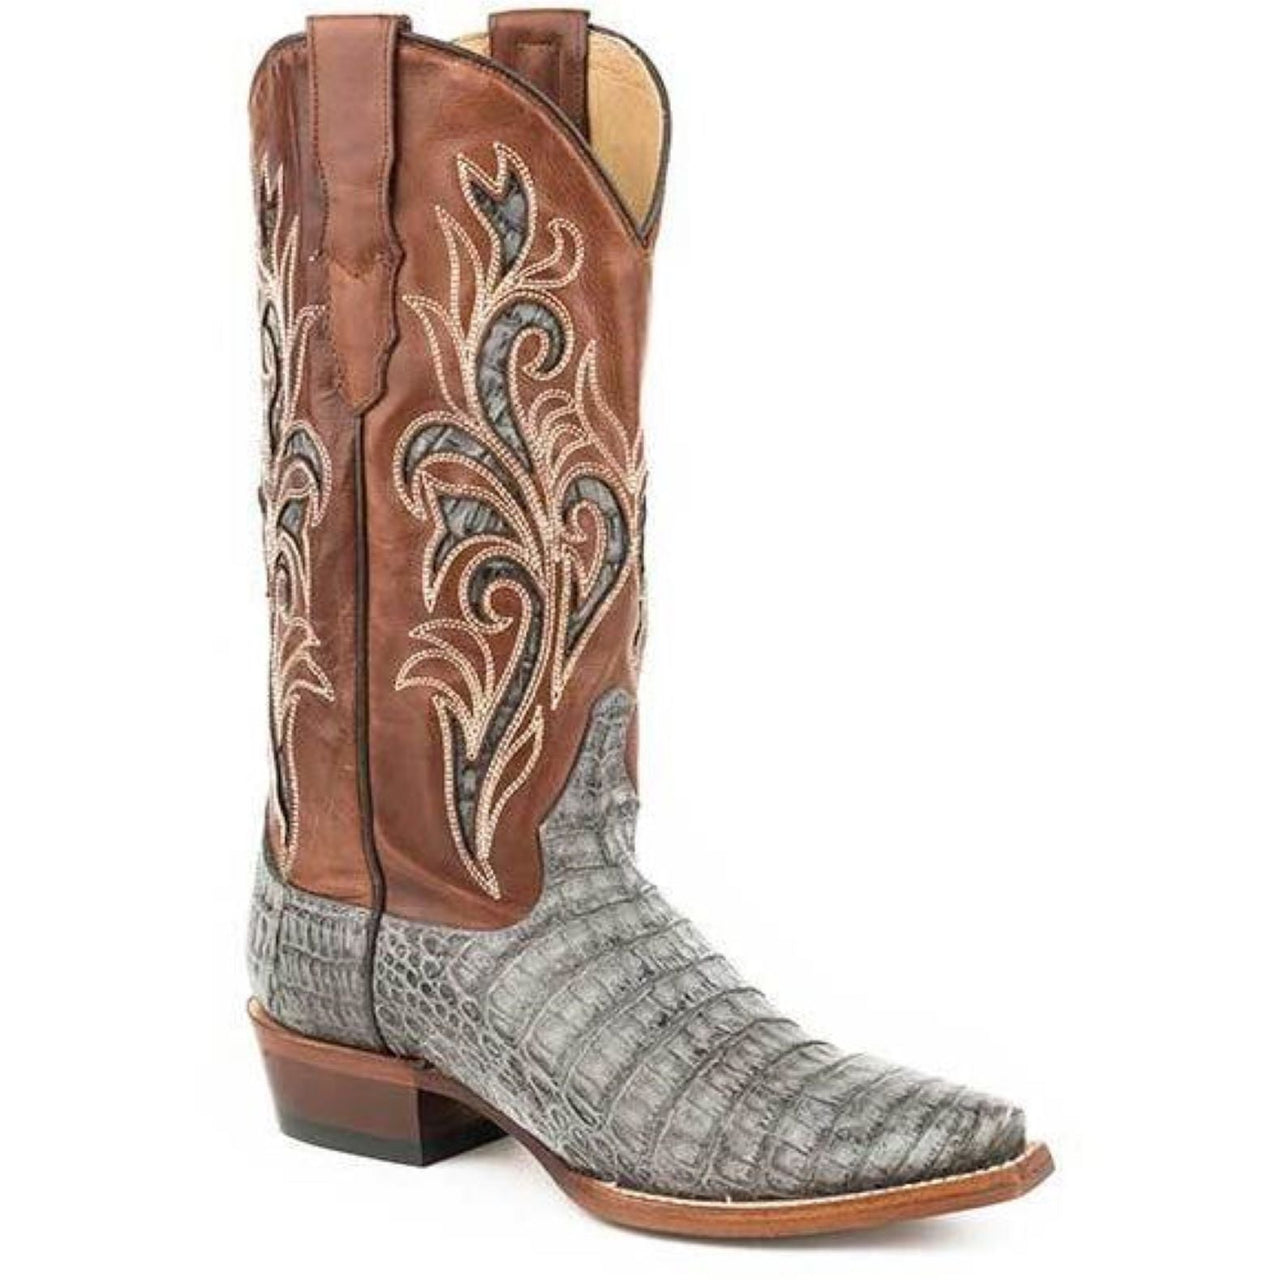 Women's Stetson Clarisa Caiman Boots Handcrafted Gray - yeehawcowboy